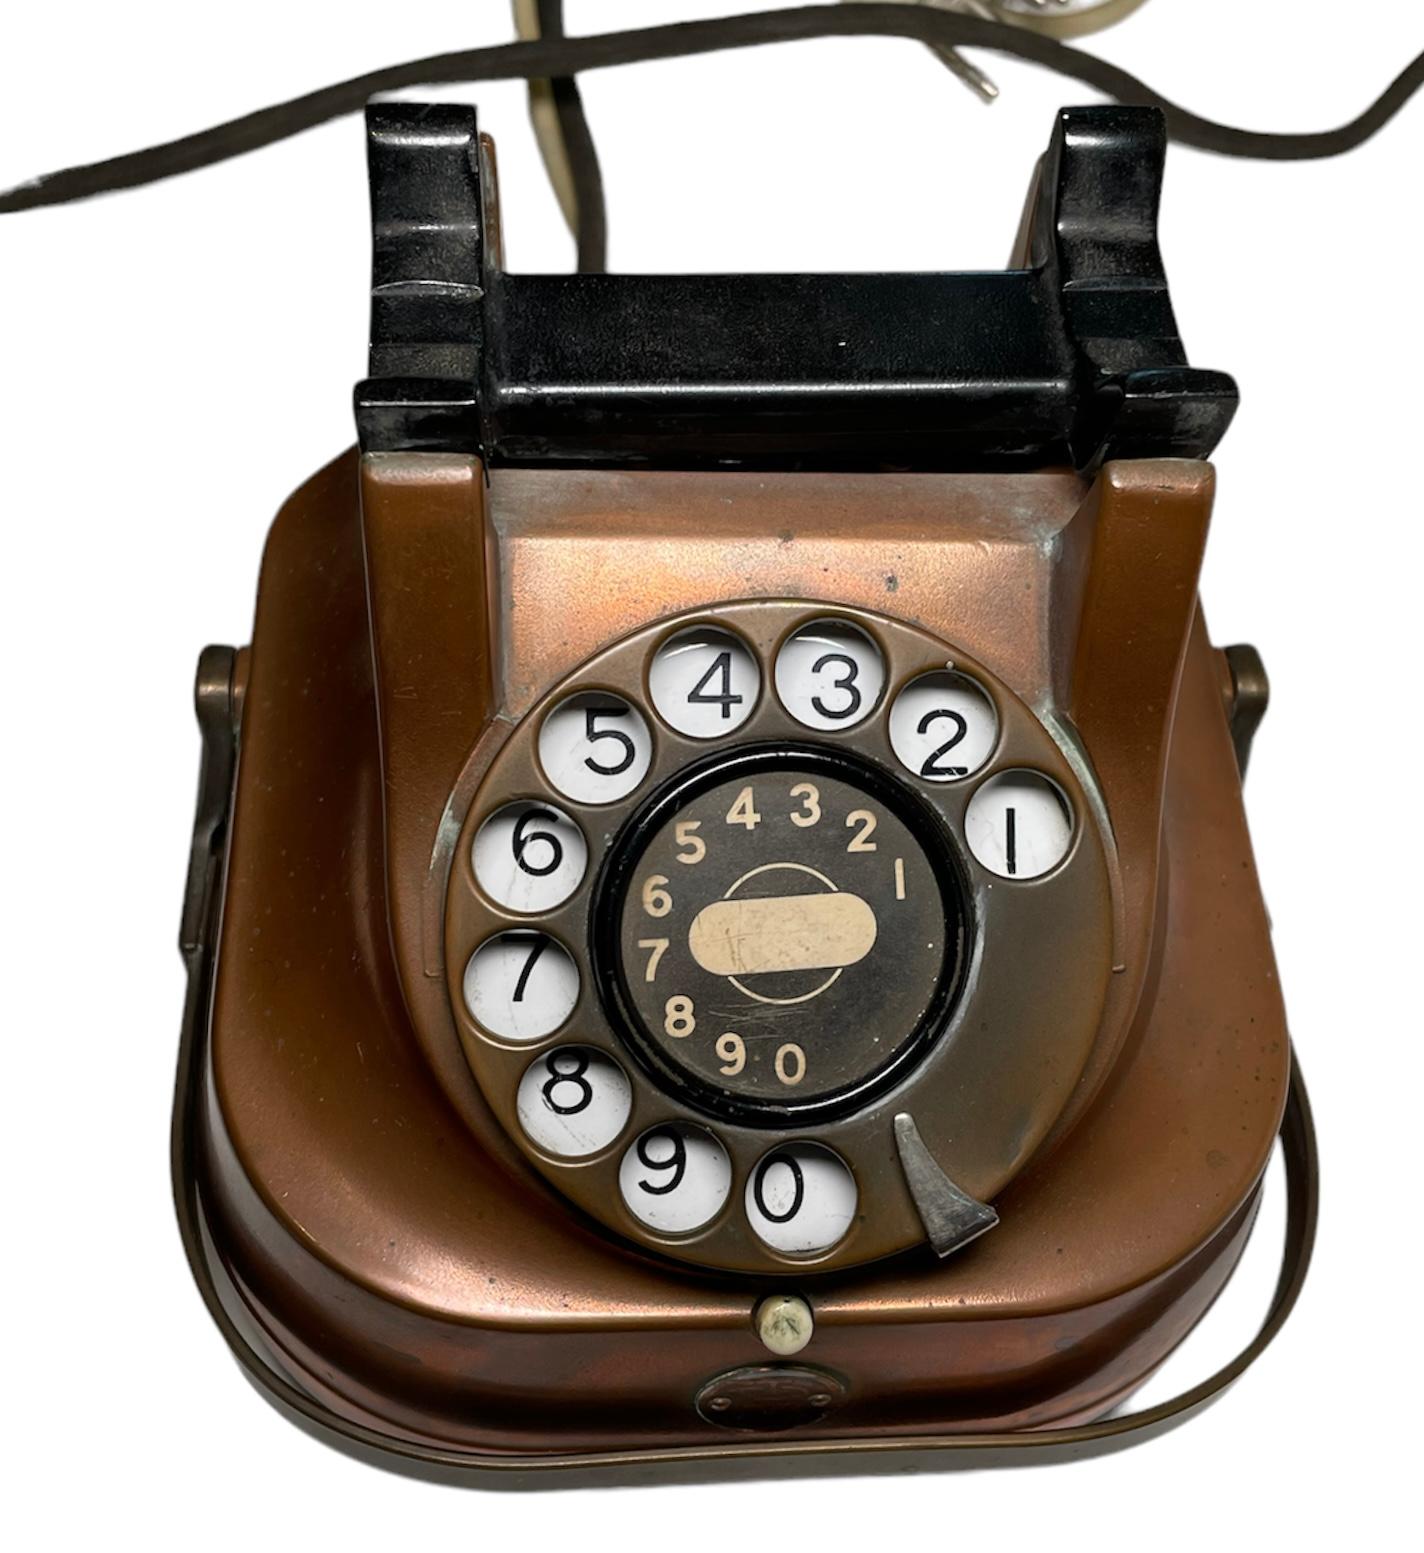 This is a FTR table rotary dial telephone. It’s case is made of copper and the handset is made of Bakelite. The rotary dial and handle are made of brass. There is a round small metal plaque hallmarked FTR in the front of the telephone. Two cords